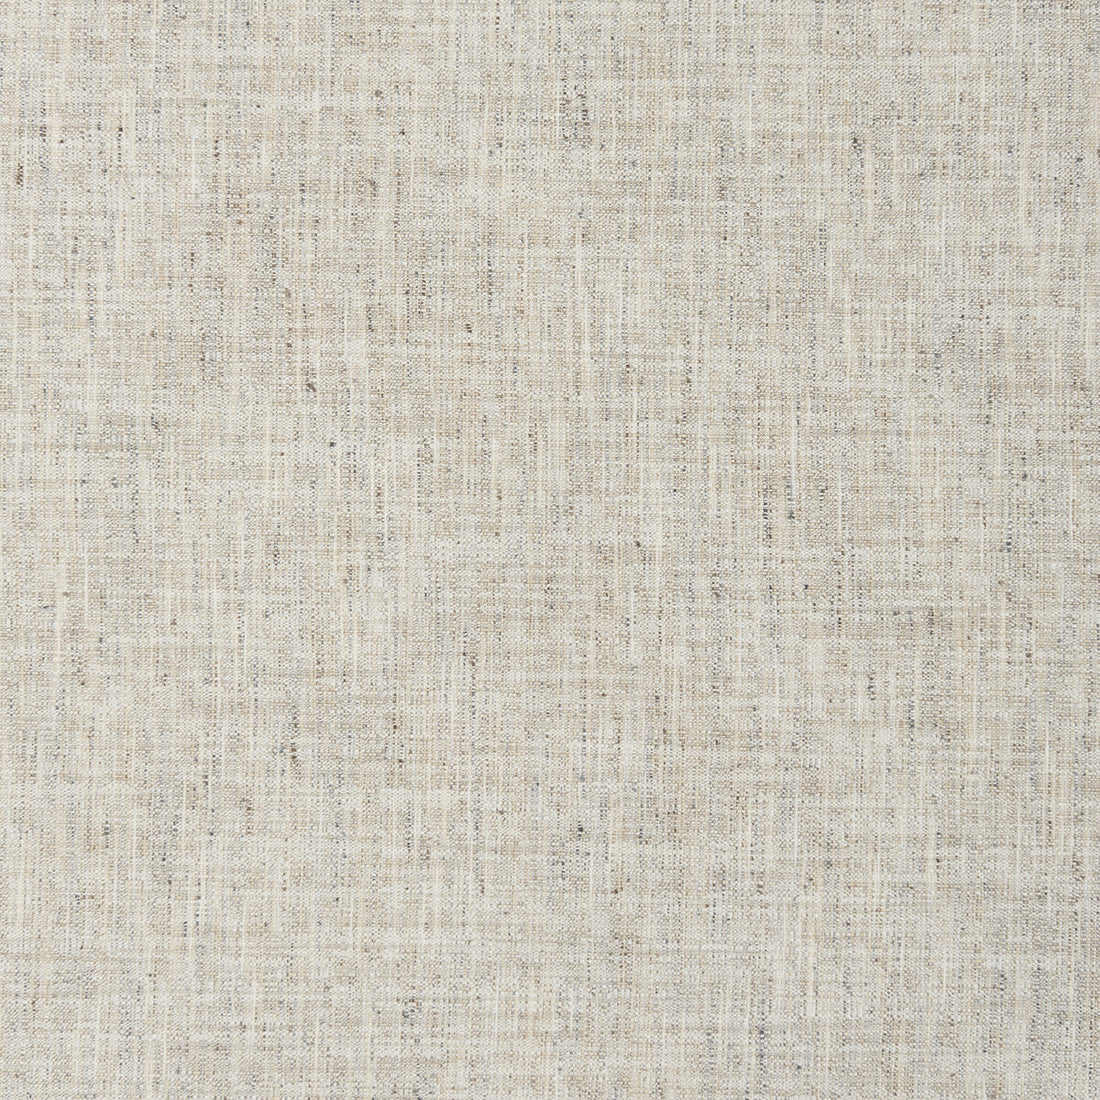 Kravet Smart fabric in 37079-1615 color - pattern 37079.1615.0 - by Kravet Smart in the Trio Textures collection